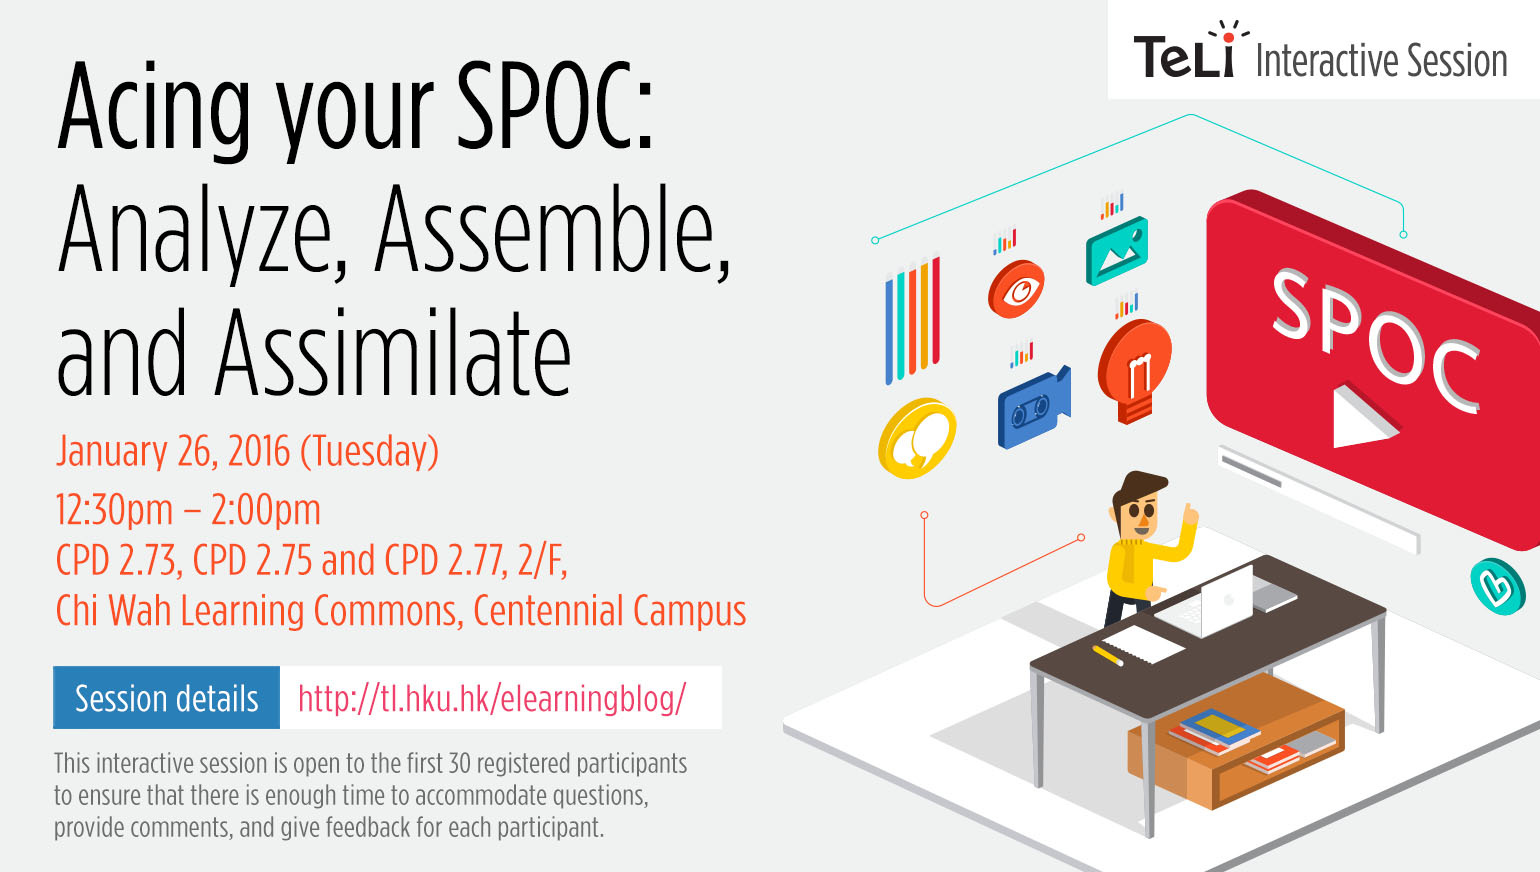 Acing your SPOC: Analyze, Assemble, and Assimilate